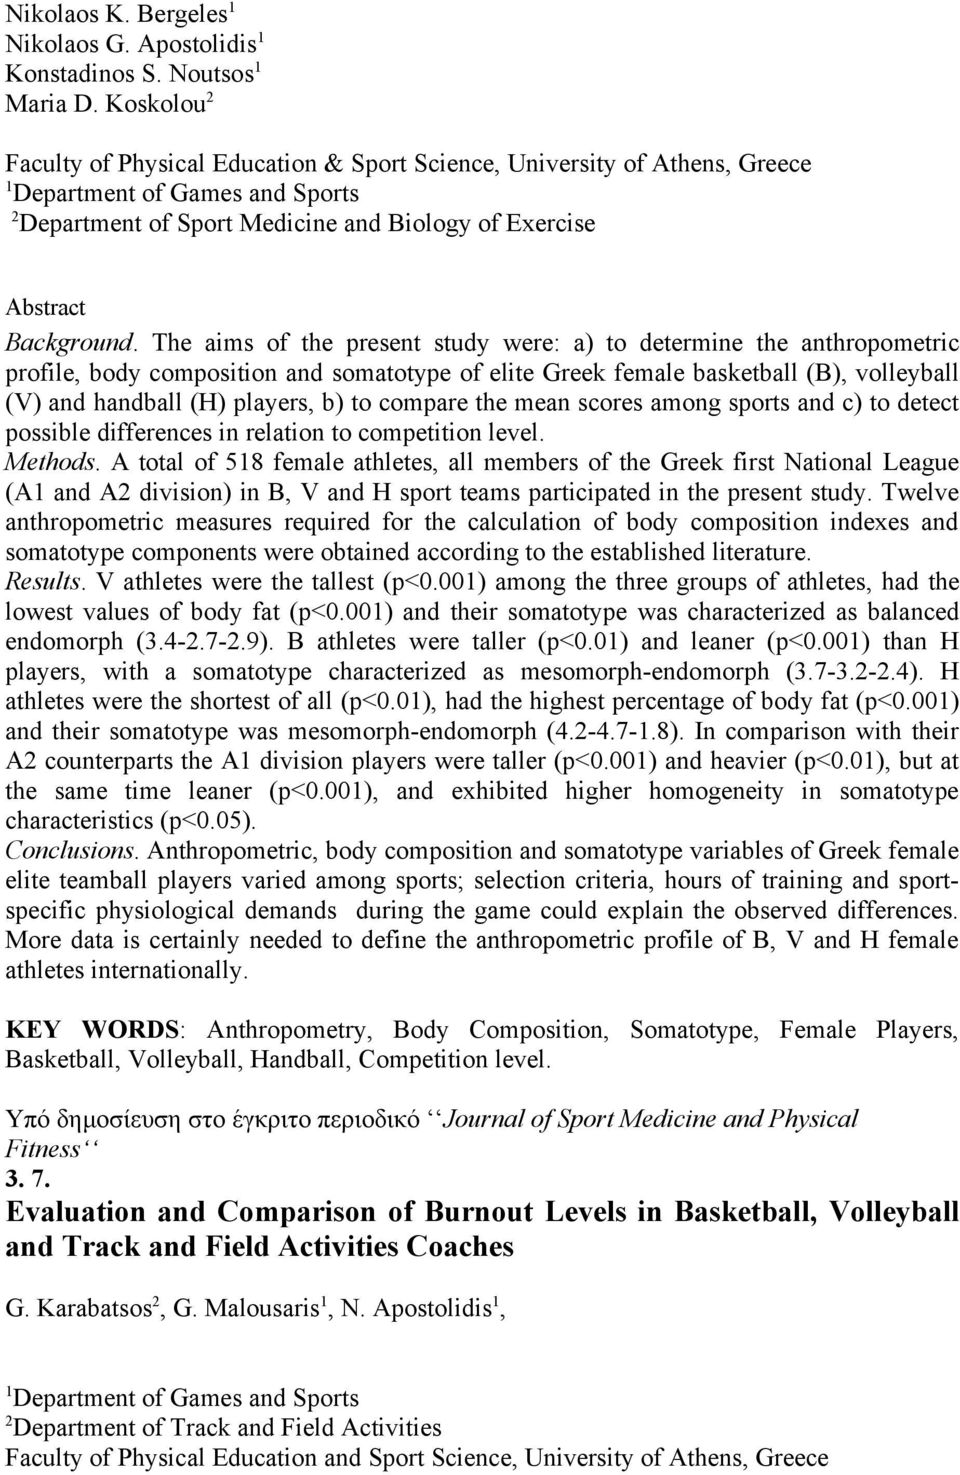 The aims of the present study were: a) to determine the anthropometric profile, body composition and somatotype of elite Greek female basketball (B), volleyball (V) and handball (H) players, b) to